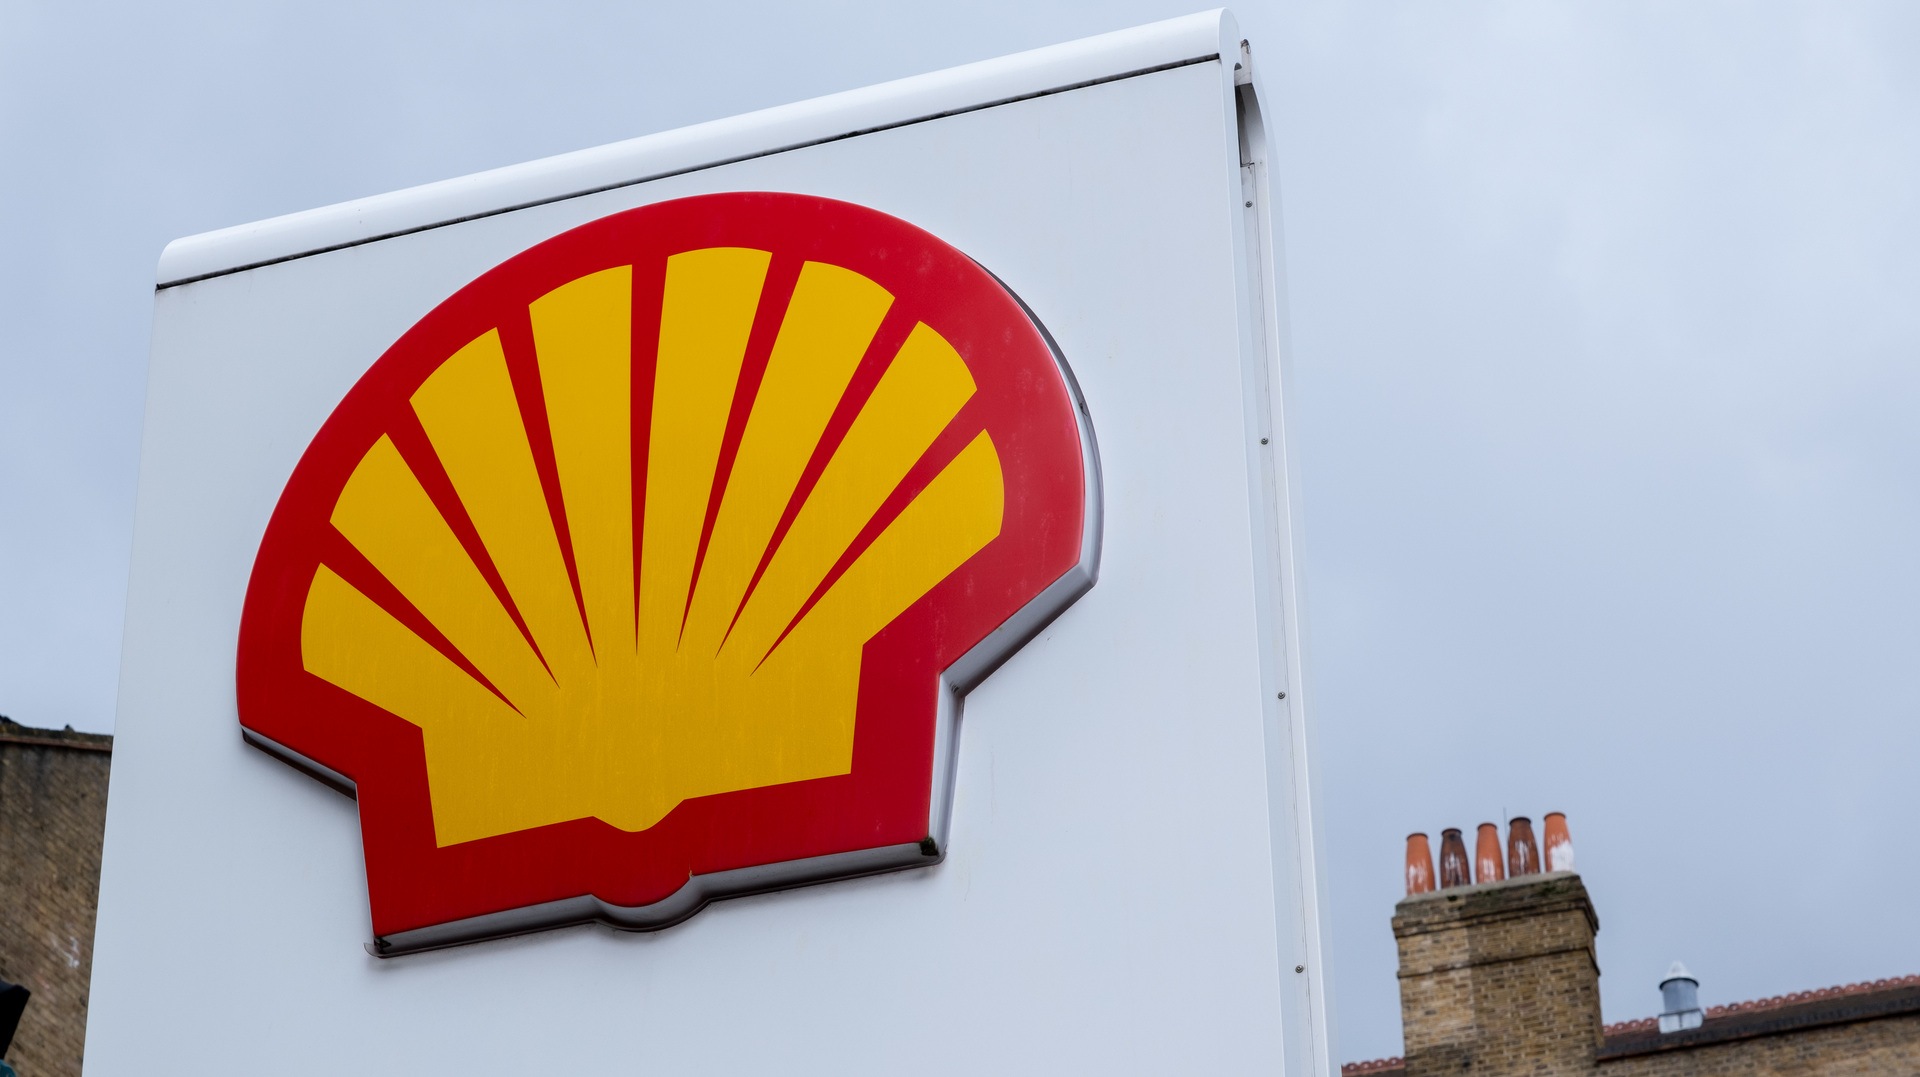 Ben Van Beurden of Shell was also among highest paid chief executives on FTSE 100